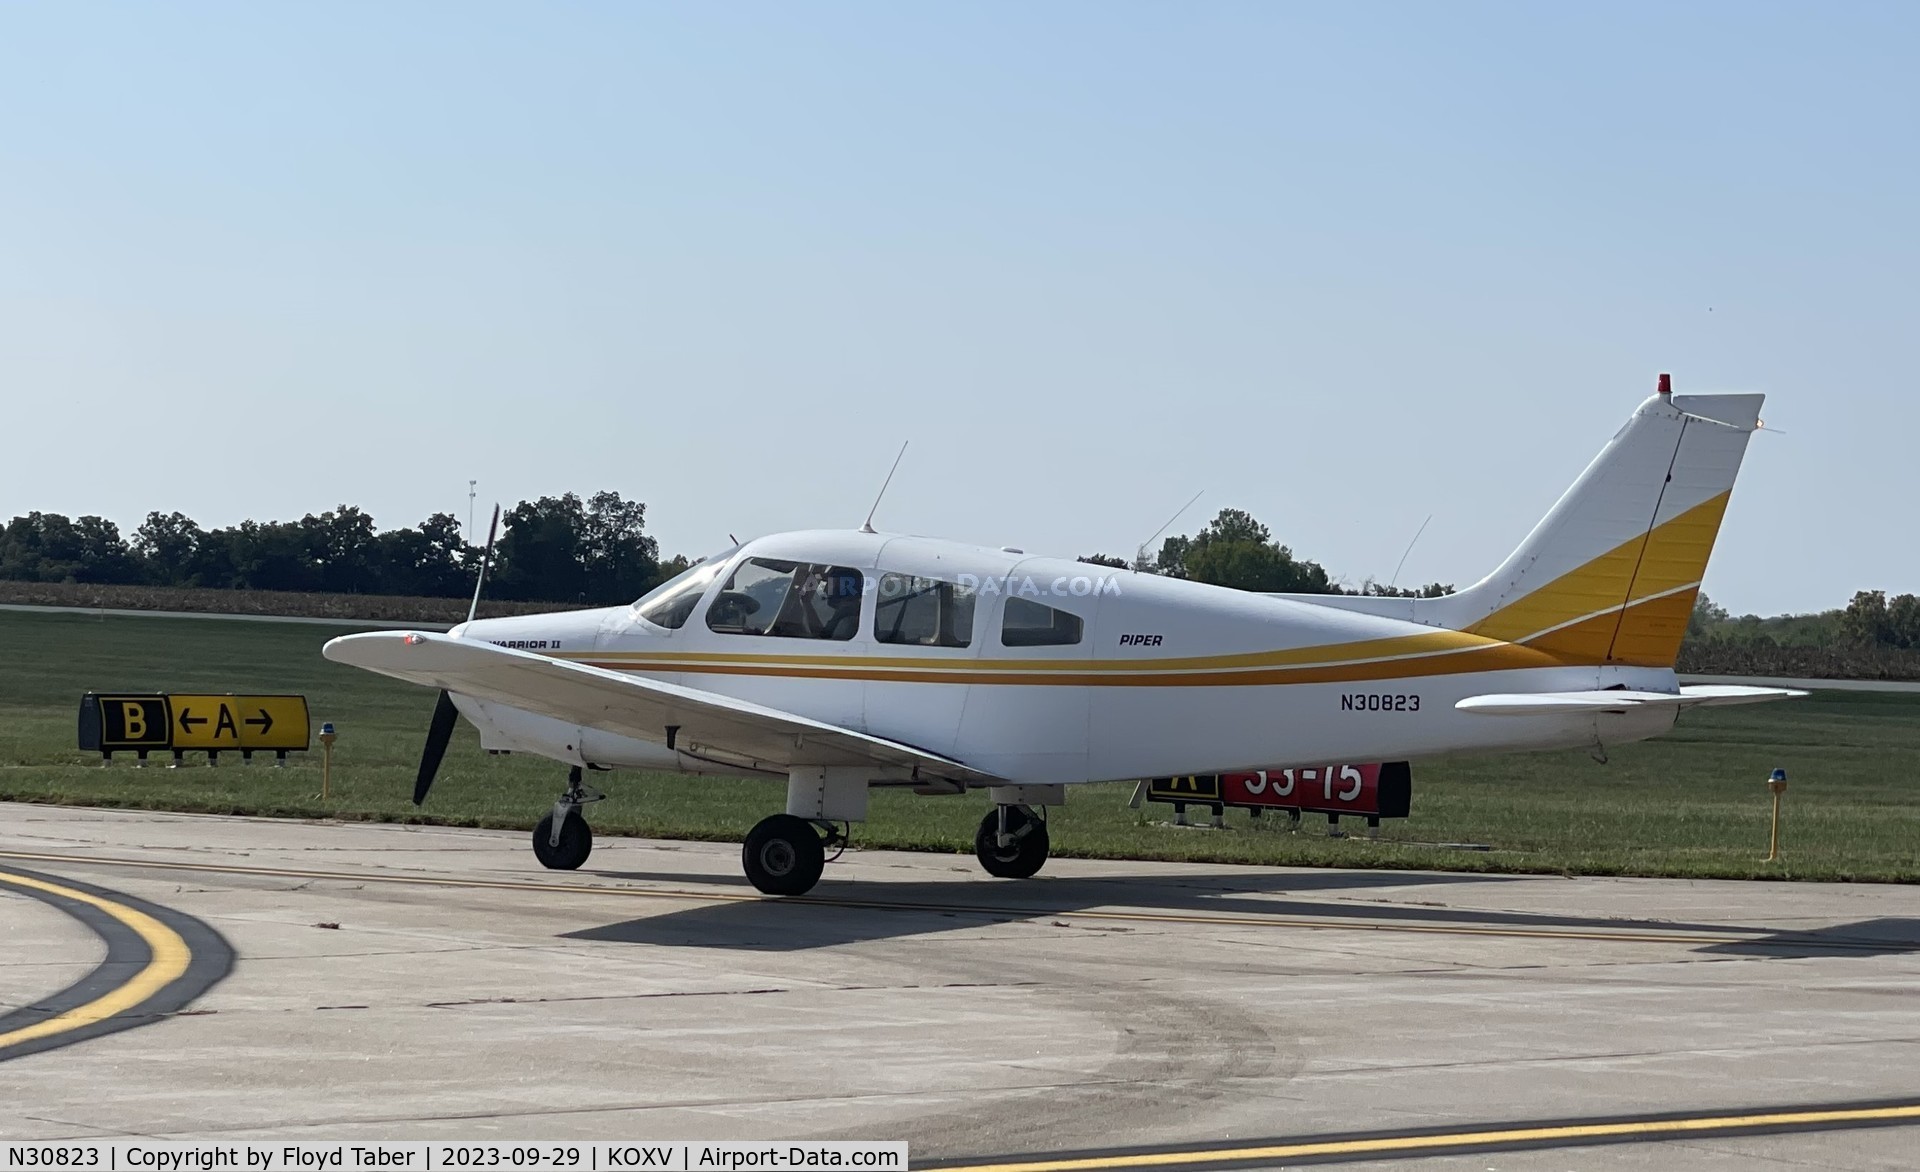 N30823, 1978 Piper PA-28-161 C/N 28-7816548, Fly Iowa 2023 Knoxville Iowa